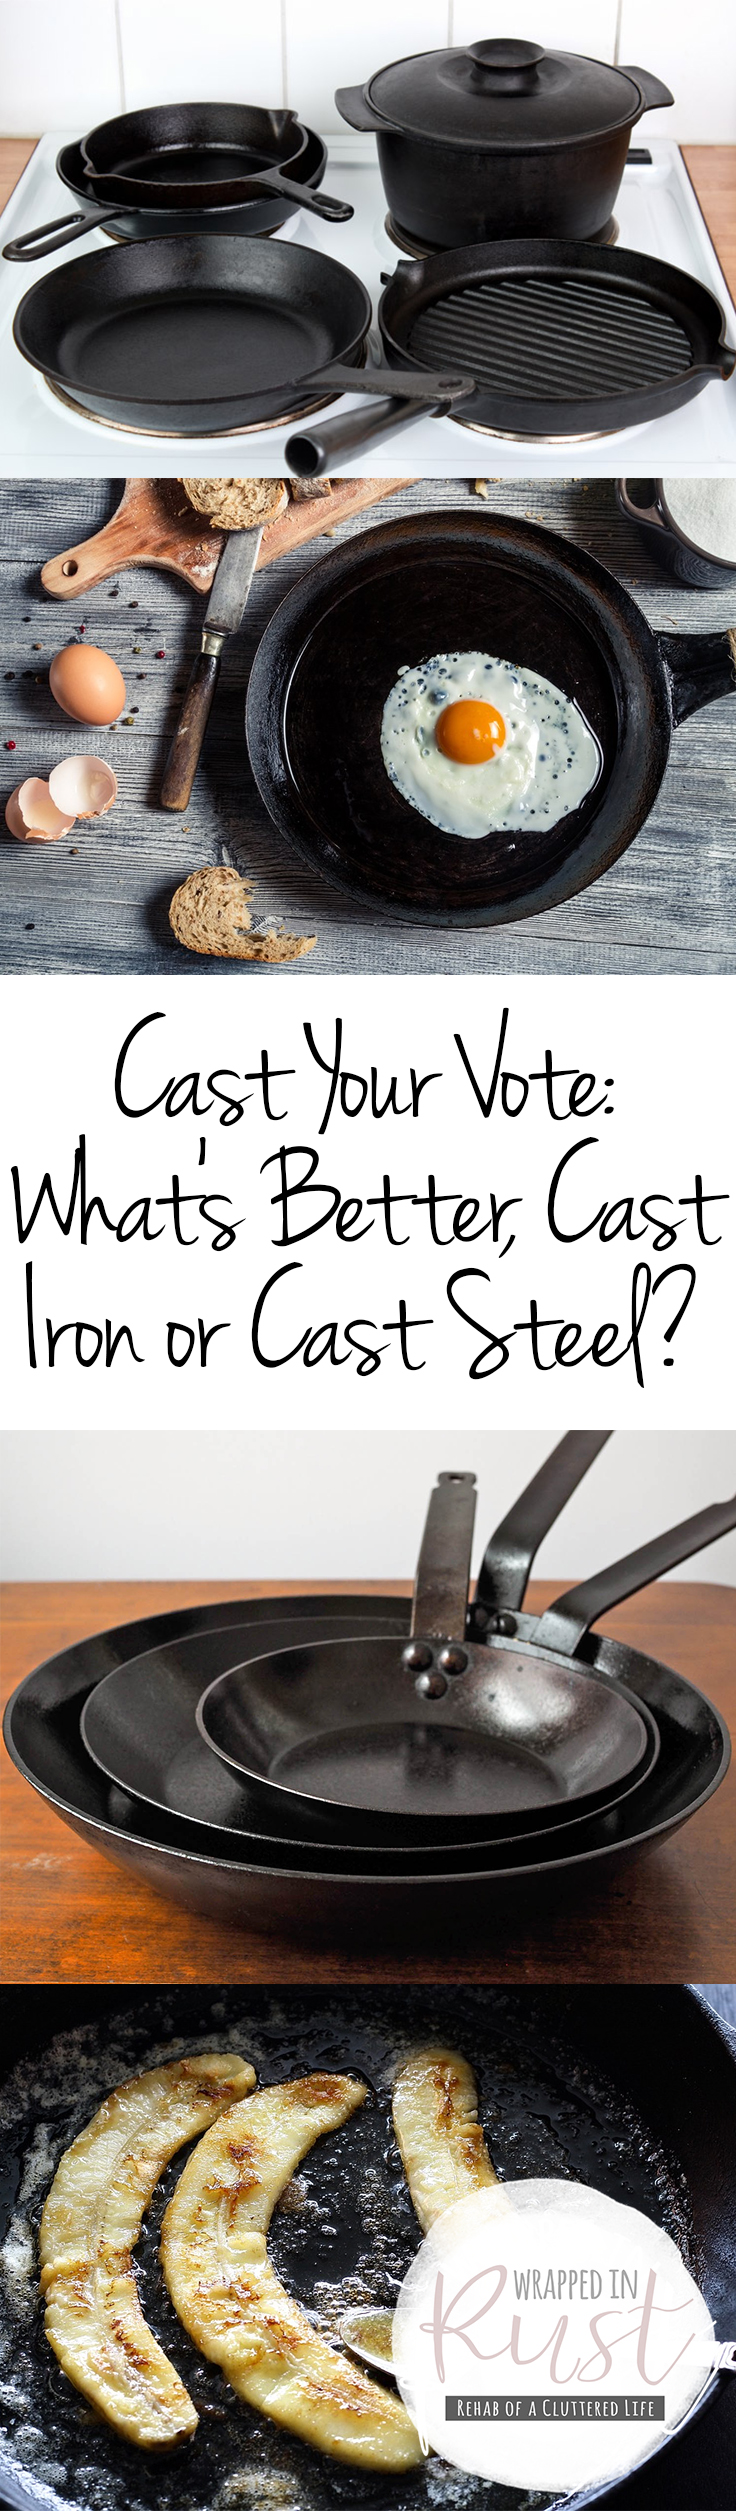 Cast Your Vote: What’s Better, Cast Iron or Cast Steel? Cast Iron, Cast Iron Vs Cast Steel, Kitchen Tips, Cooking Tips, Cooking Tricks, Home Hacks, Kitchen, Cooking Tips and Tricks, Life Hacks.